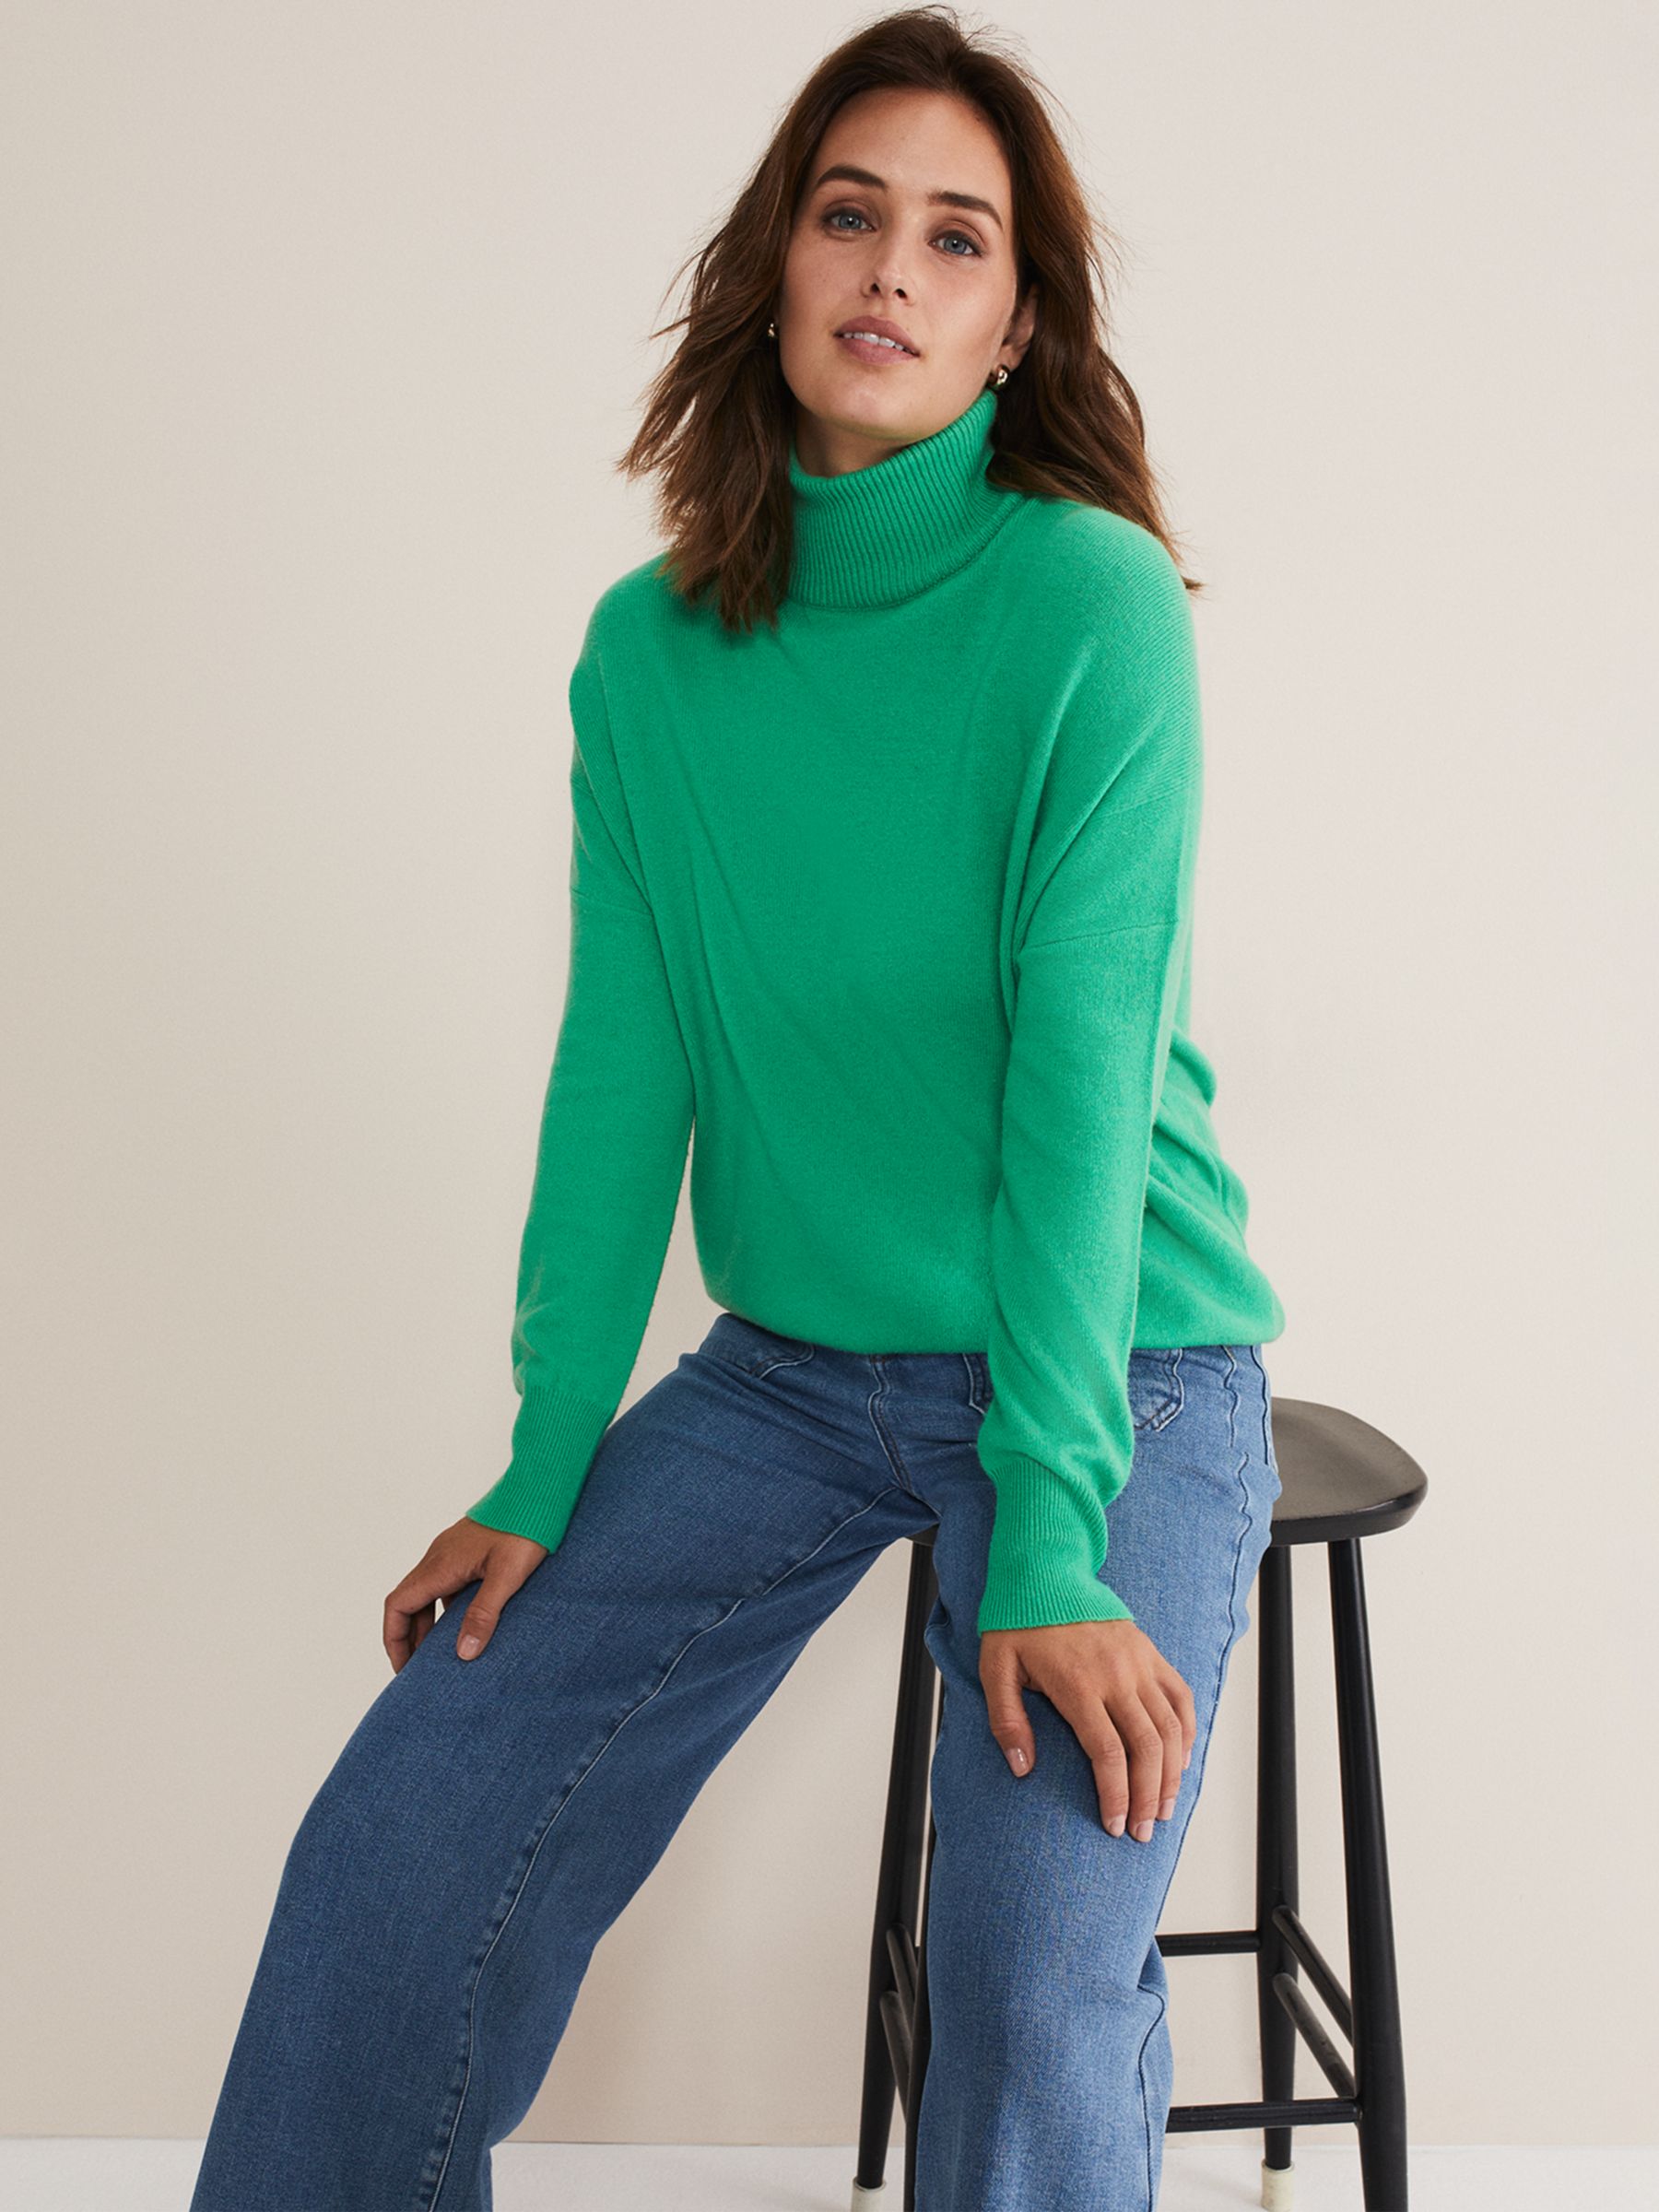 Buy Phase Eight Jemima Wool Cashmere Blend Jumper, Bright Green Online at johnlewis.com